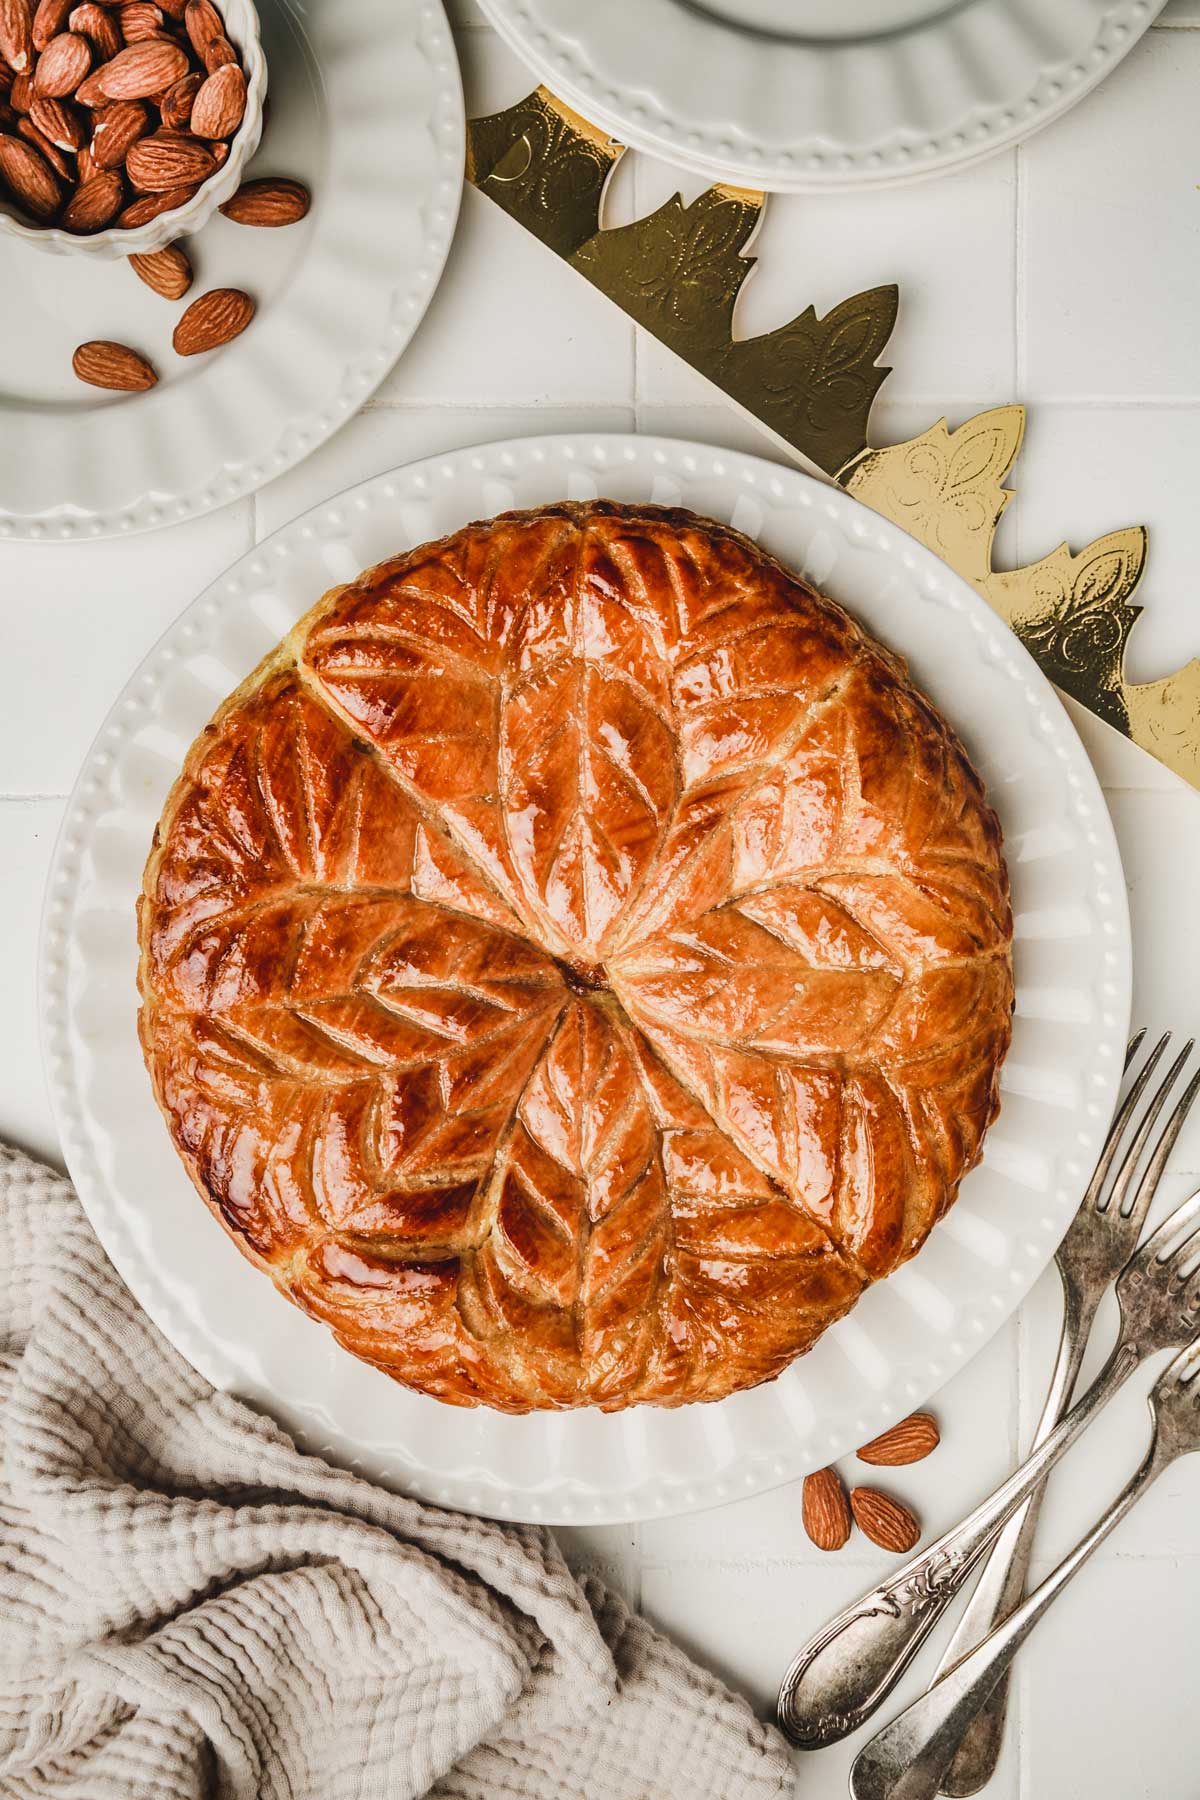 Best French King Cake - Traditional Galette des Rois Recipe